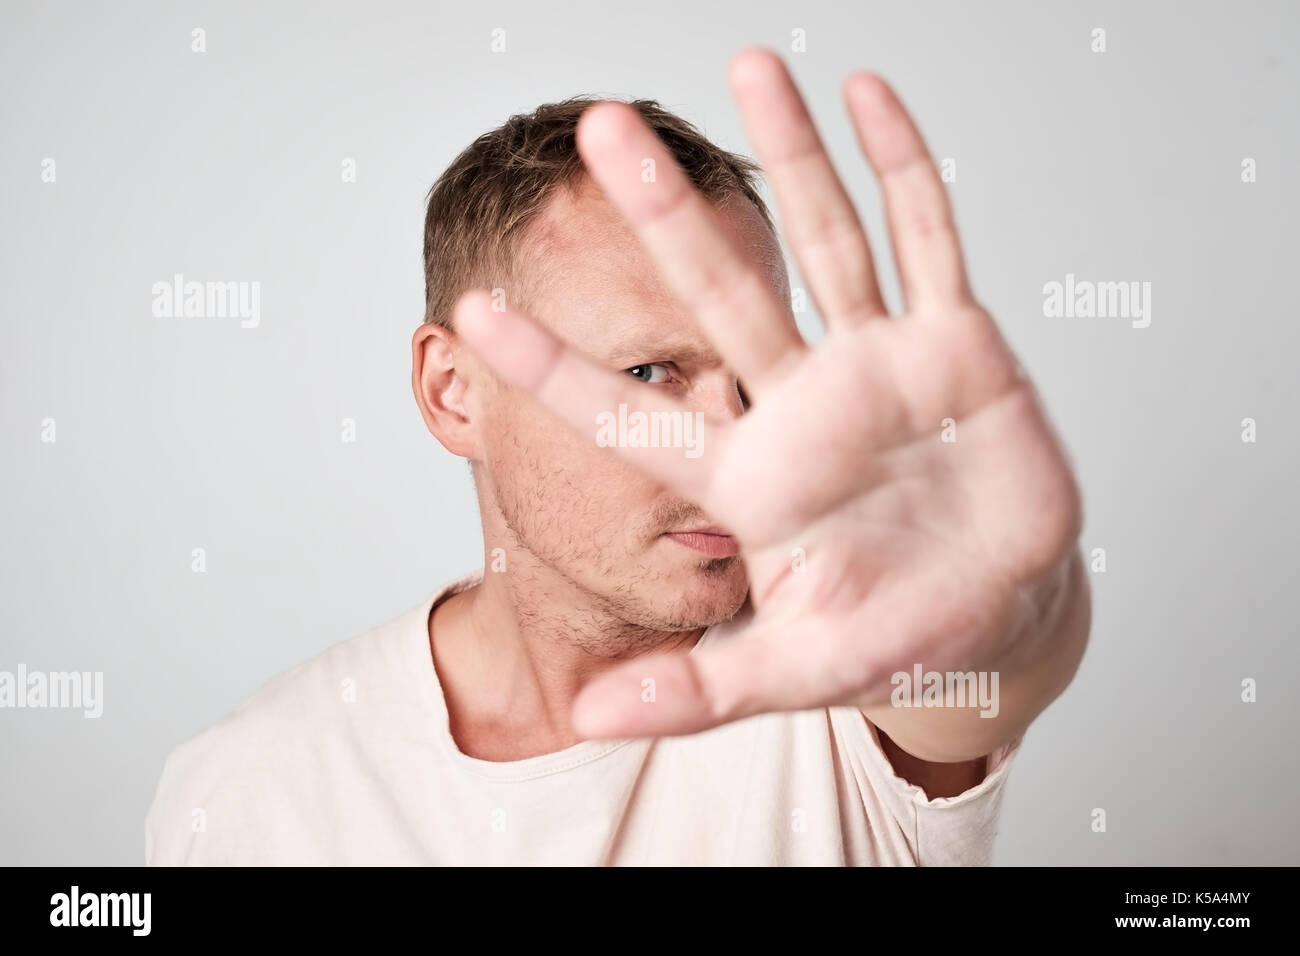 Young Caucasian man hiding his face with hand Stock Photo